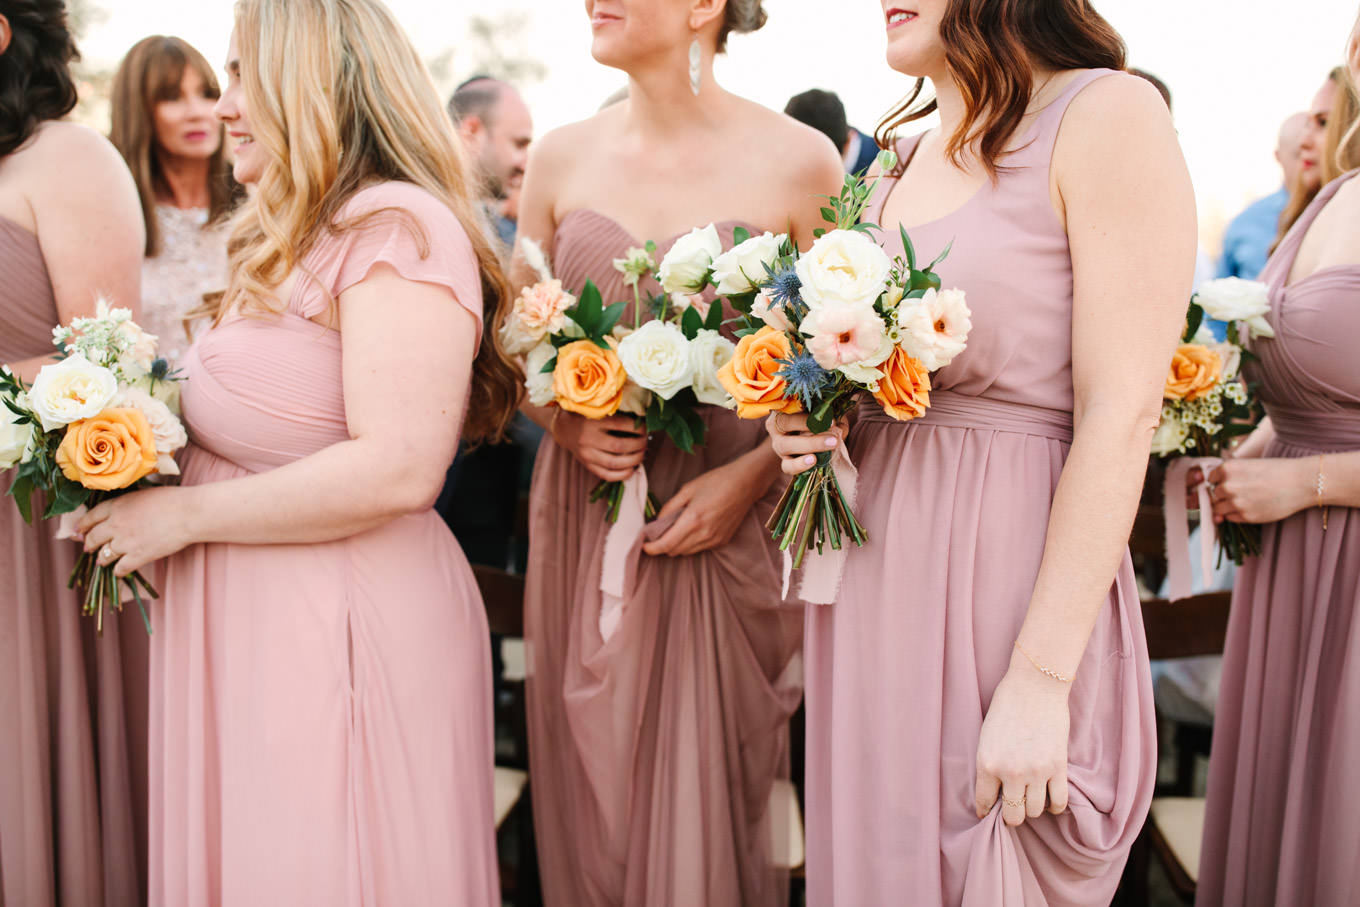 Candid of bridesmaids at wedding ceremony | Living Desert Zoo & Gardens wedding with unique details | Elevated and colorful wedding photography for fun-loving couples in Southern California |  #PalmSprings #palmspringsphotographer #gardenwedding #palmspringswedding  Source: Mary Costa Photography | Los Angeles wedding photographer 